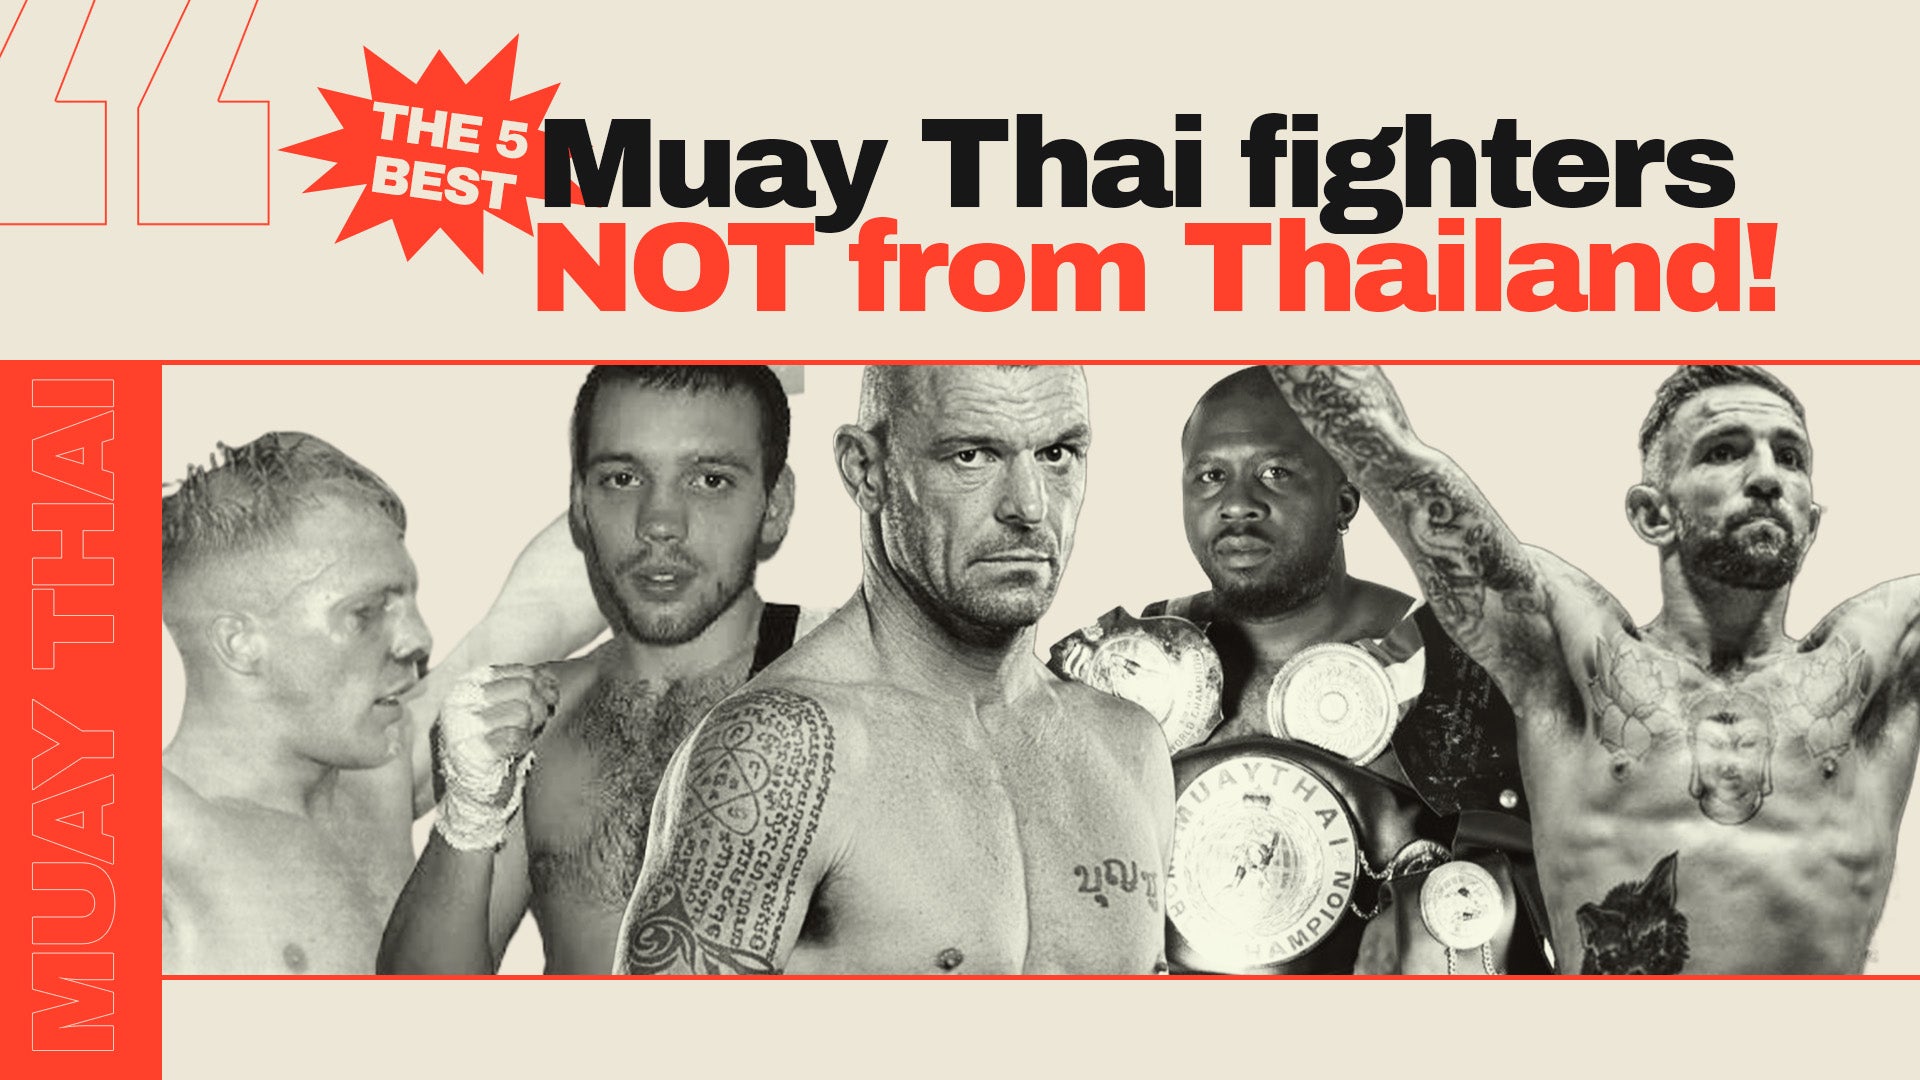 The 5 BEST Muay Thai fighters NOT from Thailand!